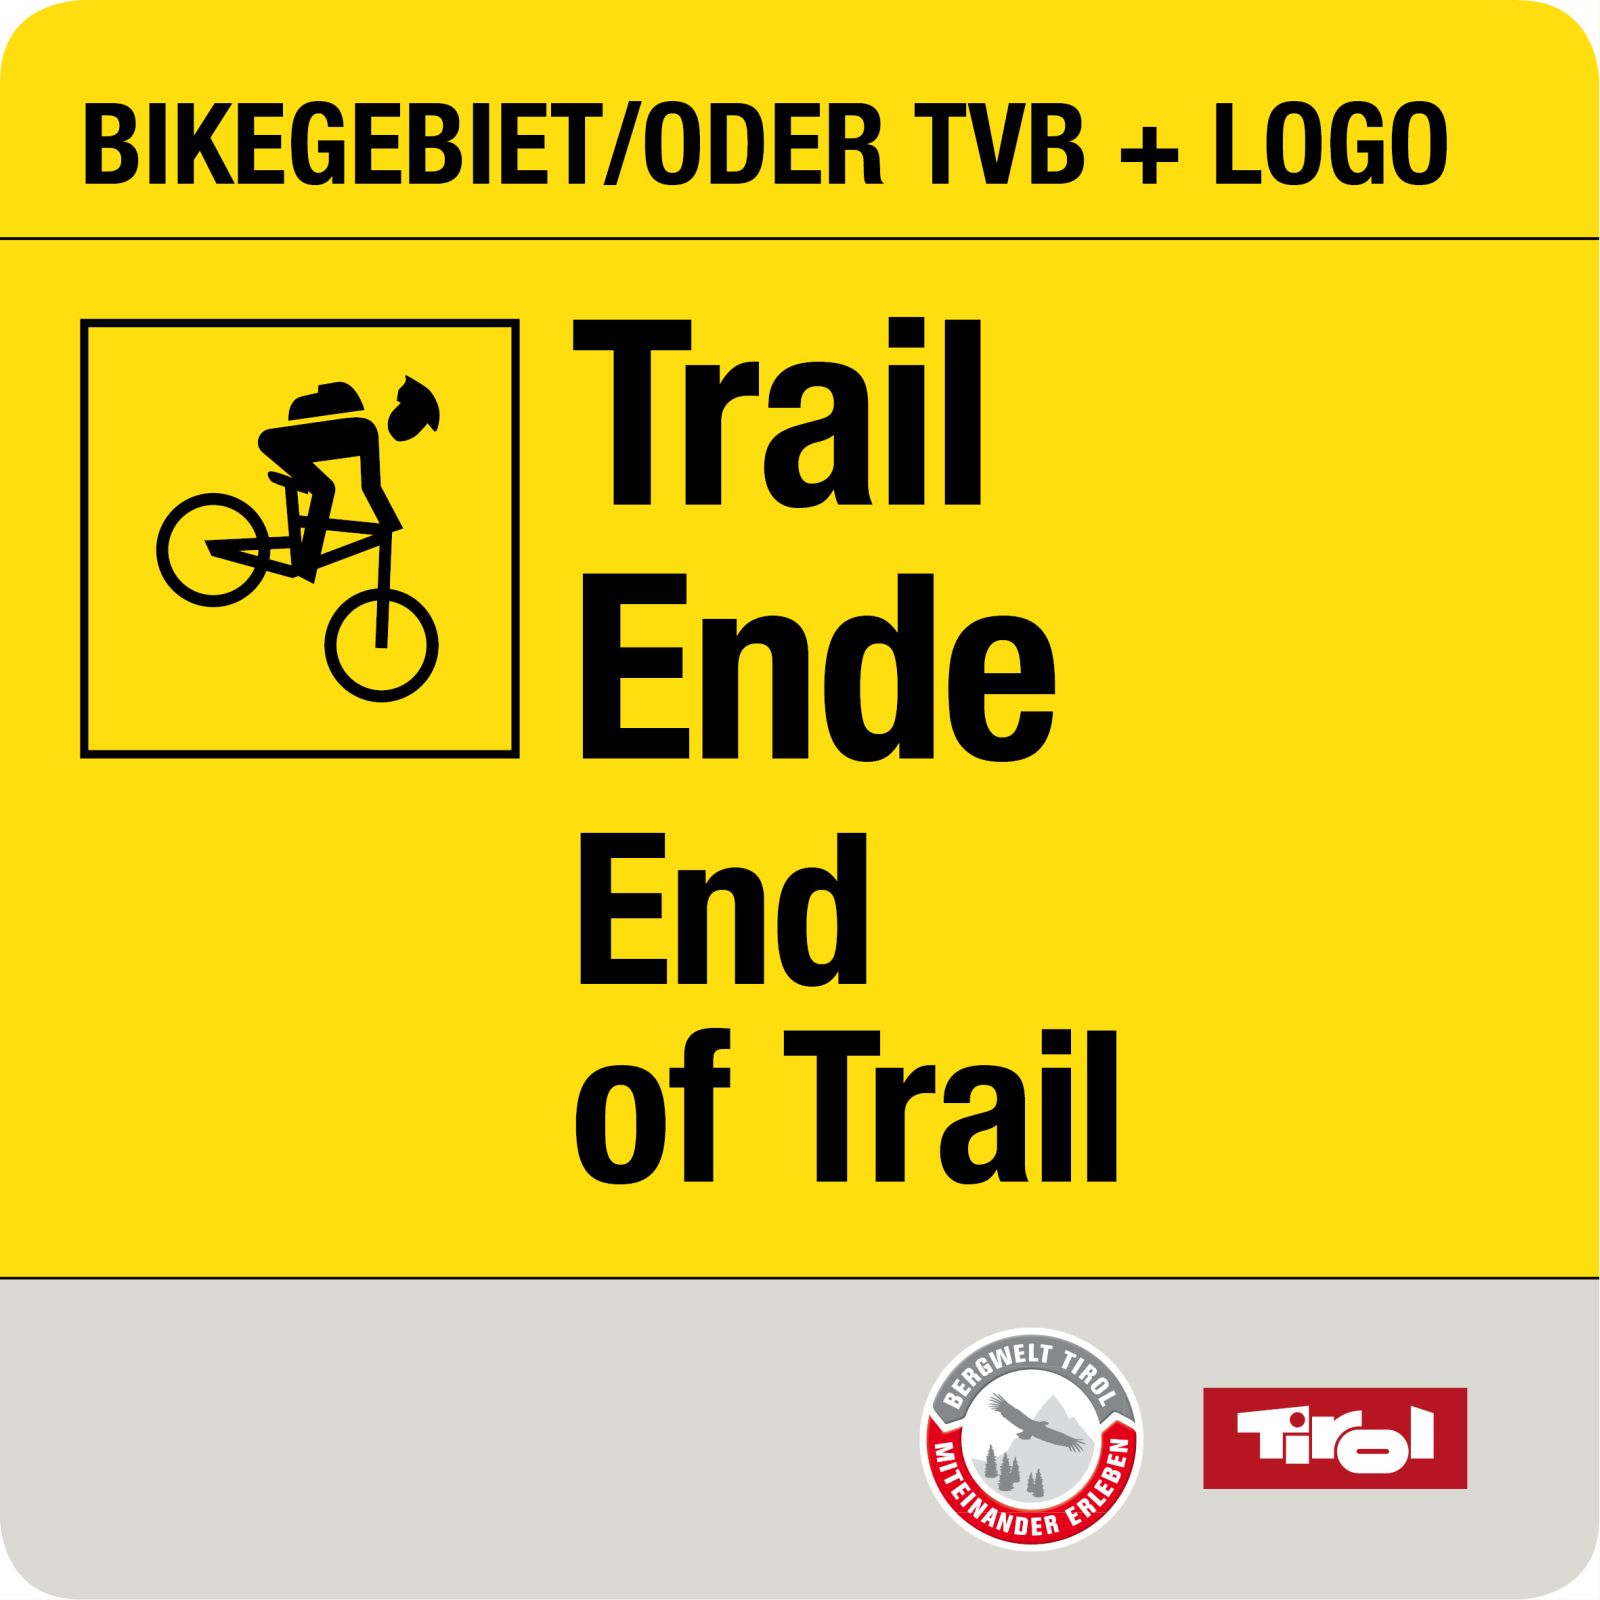 Additional signage, Trail End- End of Trail board.